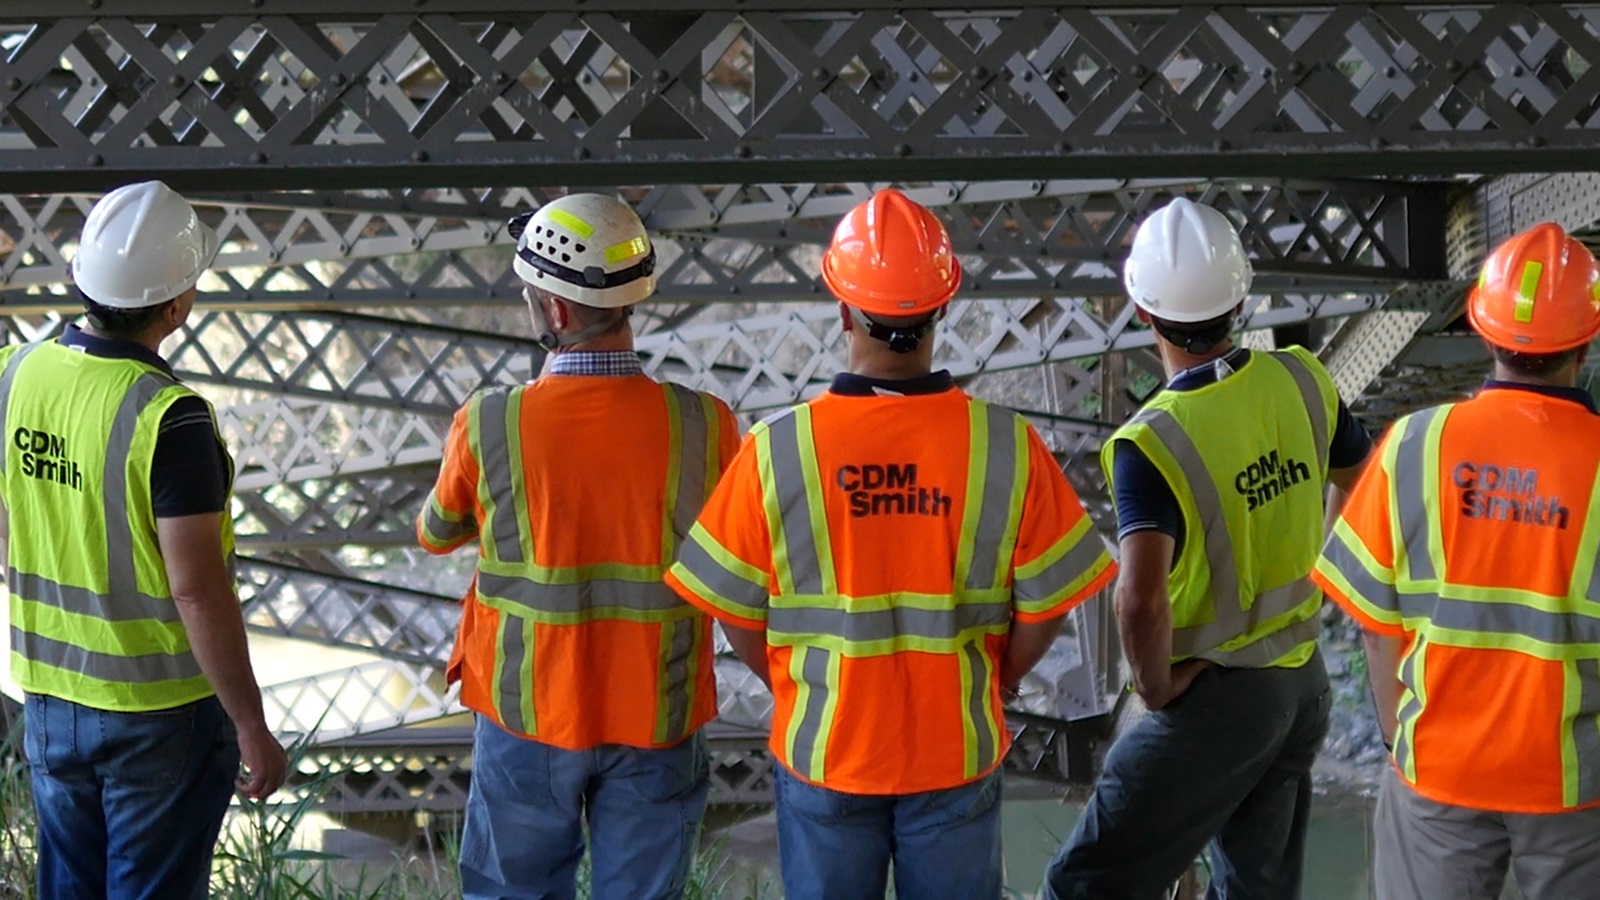 Five construction field staff, including CDM Smith employees, evaluating the underside of a bridge